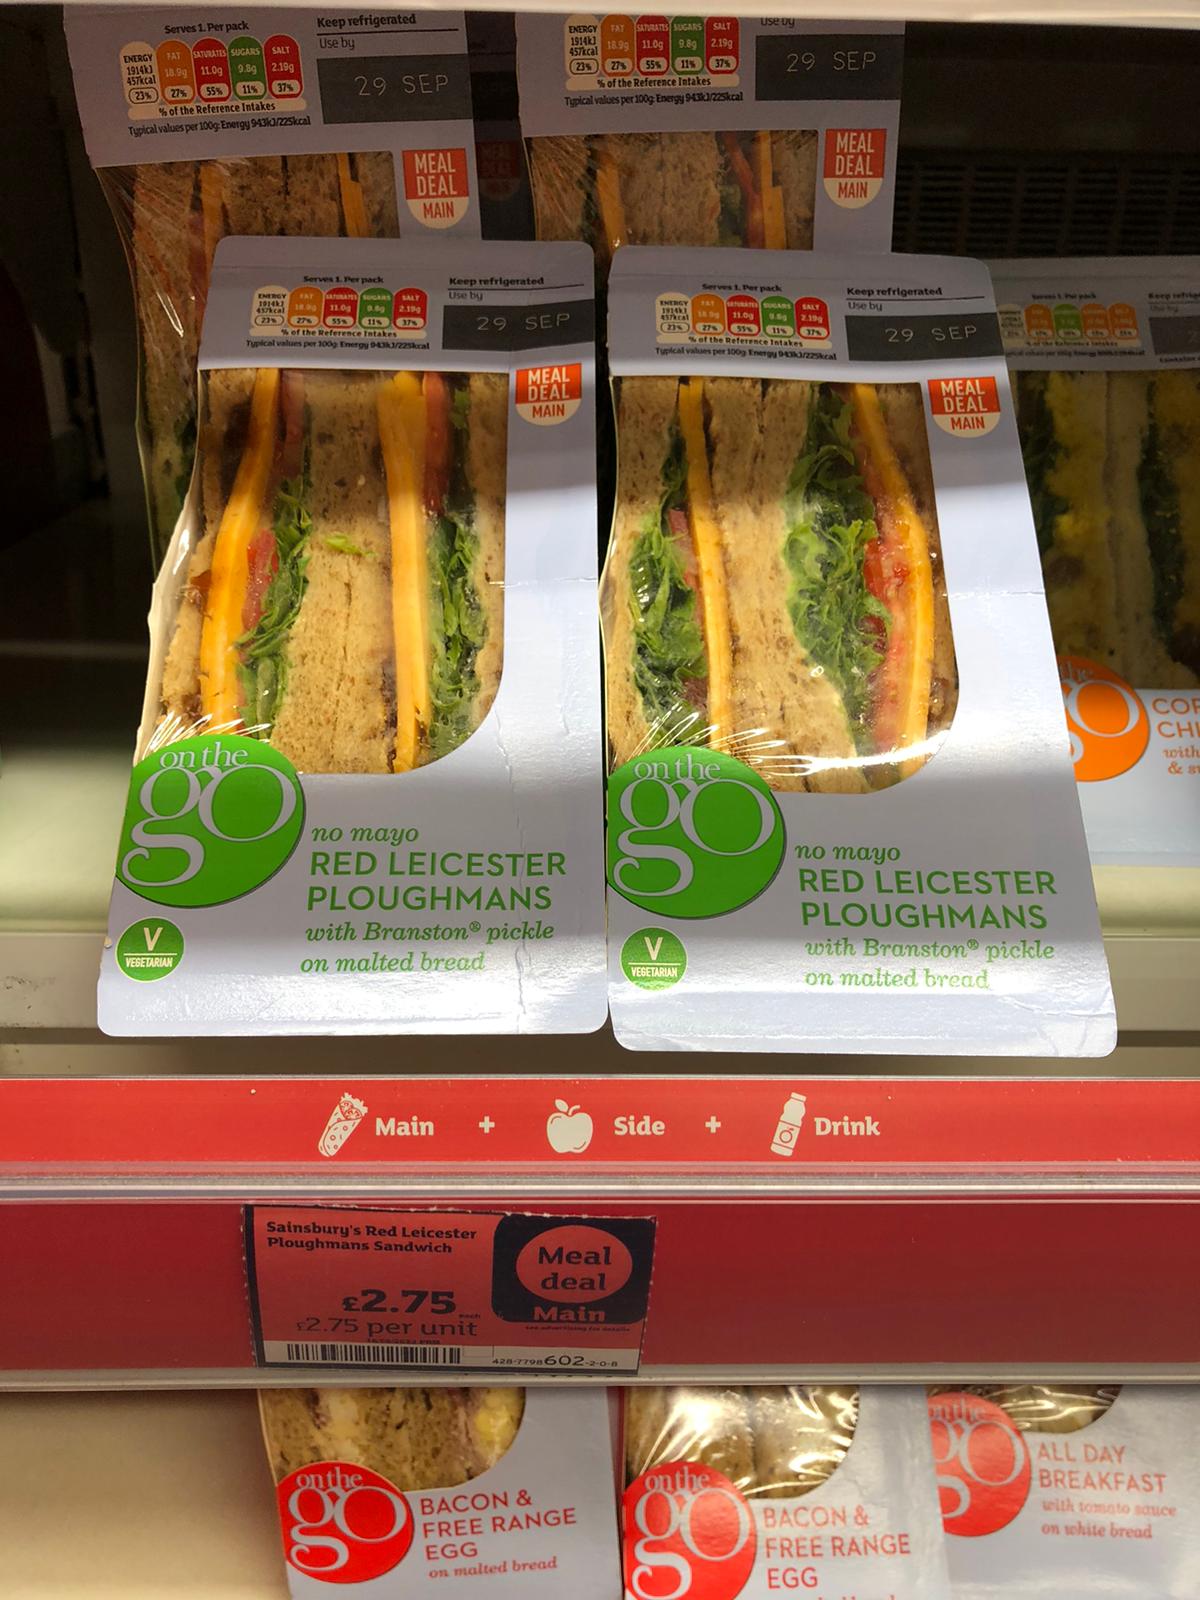 Sainsbury’s cheese ploughman’s costs £2.75 or £5 as part of a meal deal at its Moorgate branch